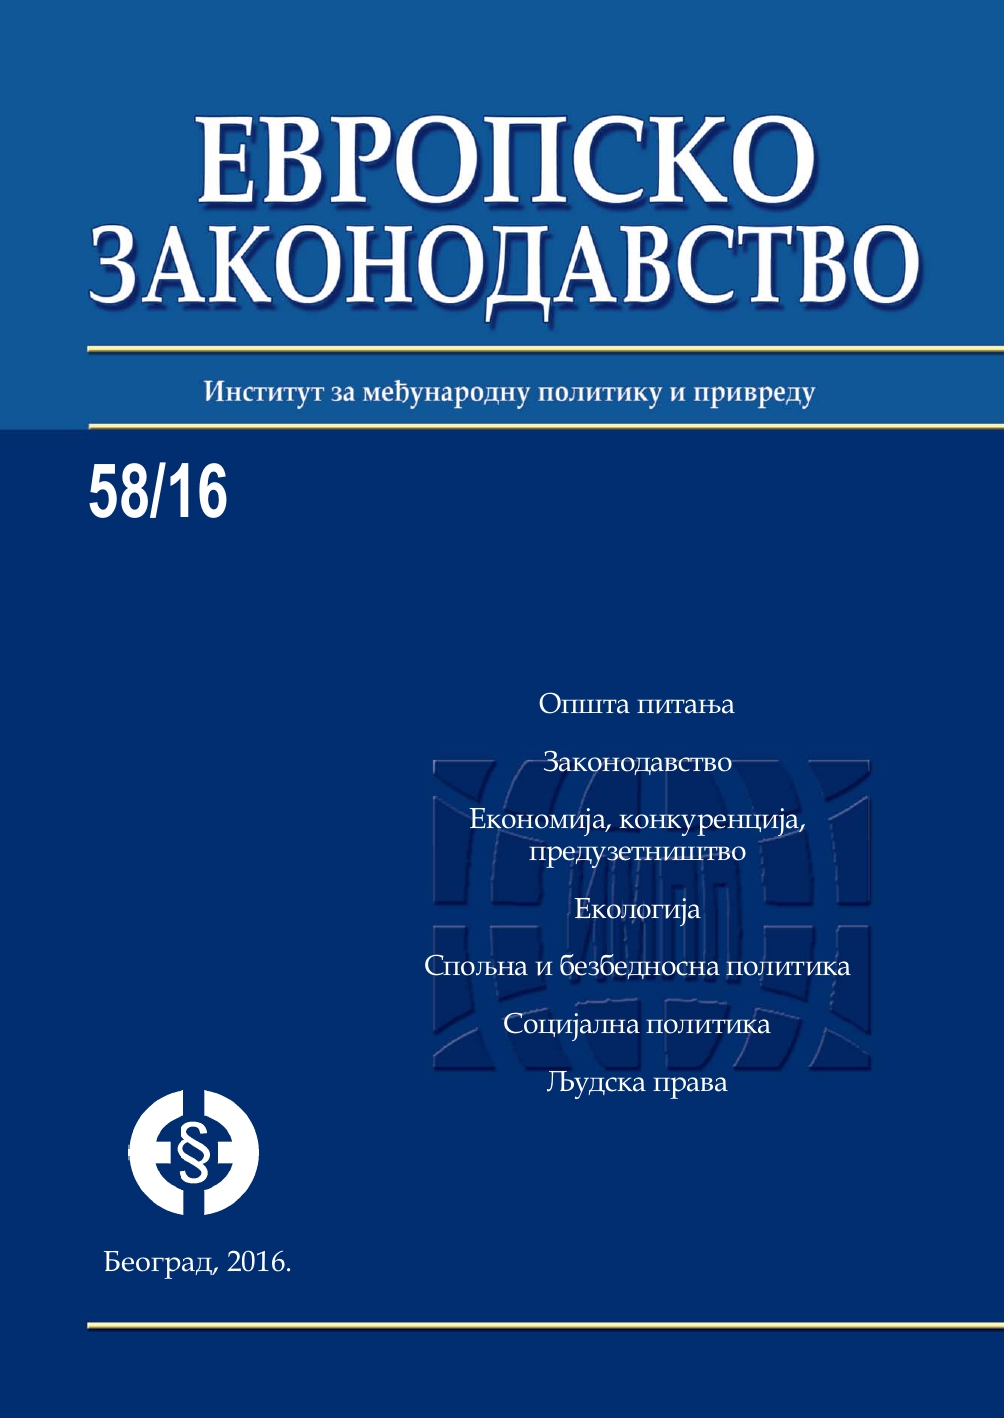 Analysis of the report of the European Commission for Serbia from 2011 to 2015 Cover Image